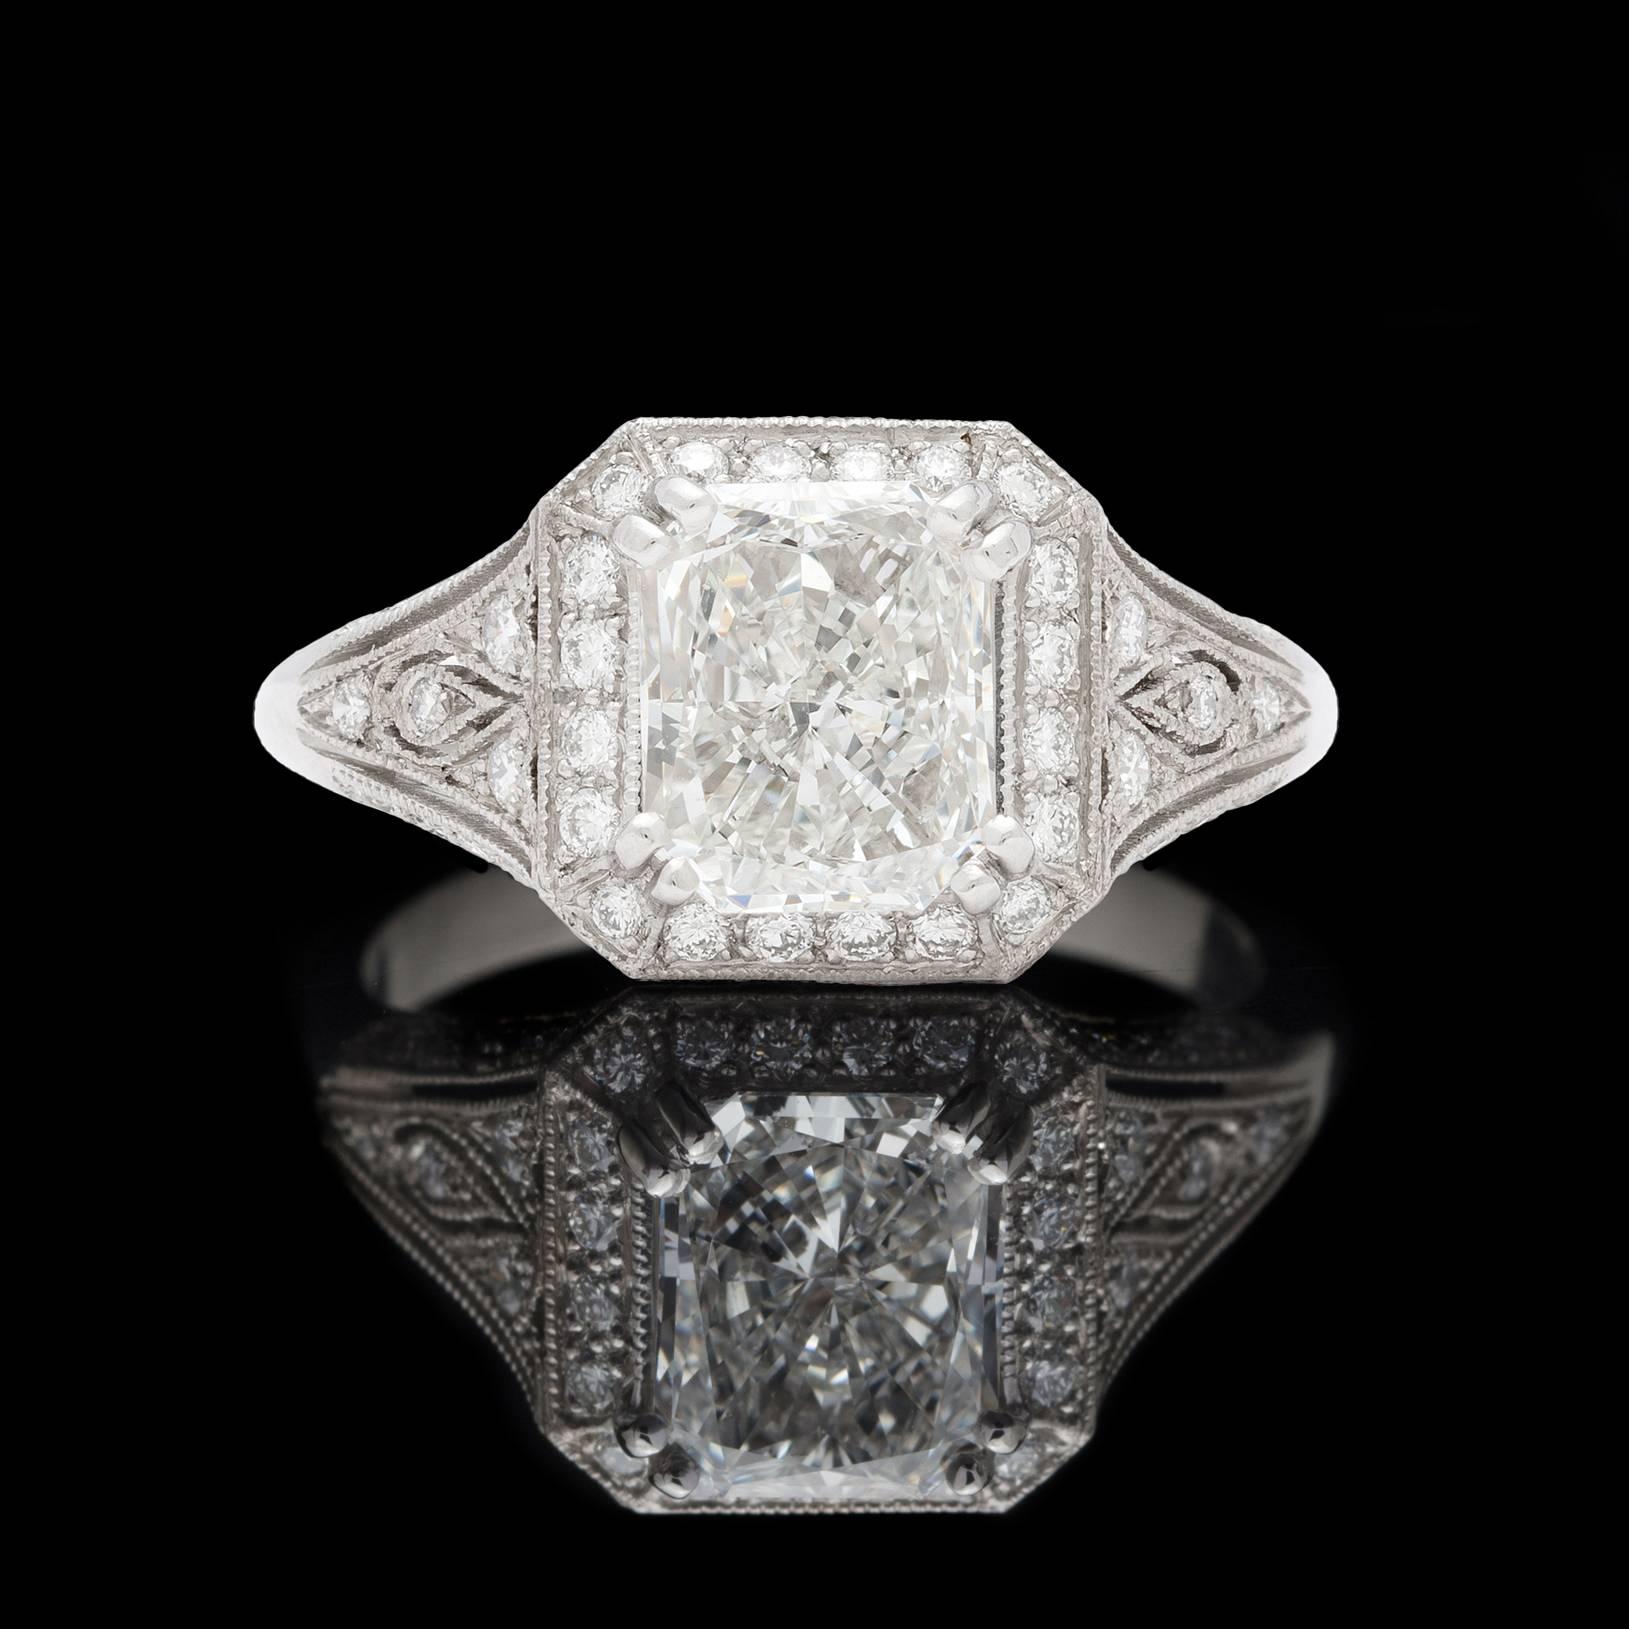 Phenomenal design and craftsmanship meet one very special diamond in this Platinum ring by French designer Sebastien Barier. The 1.71 carat Radiant Cut center stone is a GIA G/VS1 with tremendous sparkle and fire, surrounded by over half a carat of